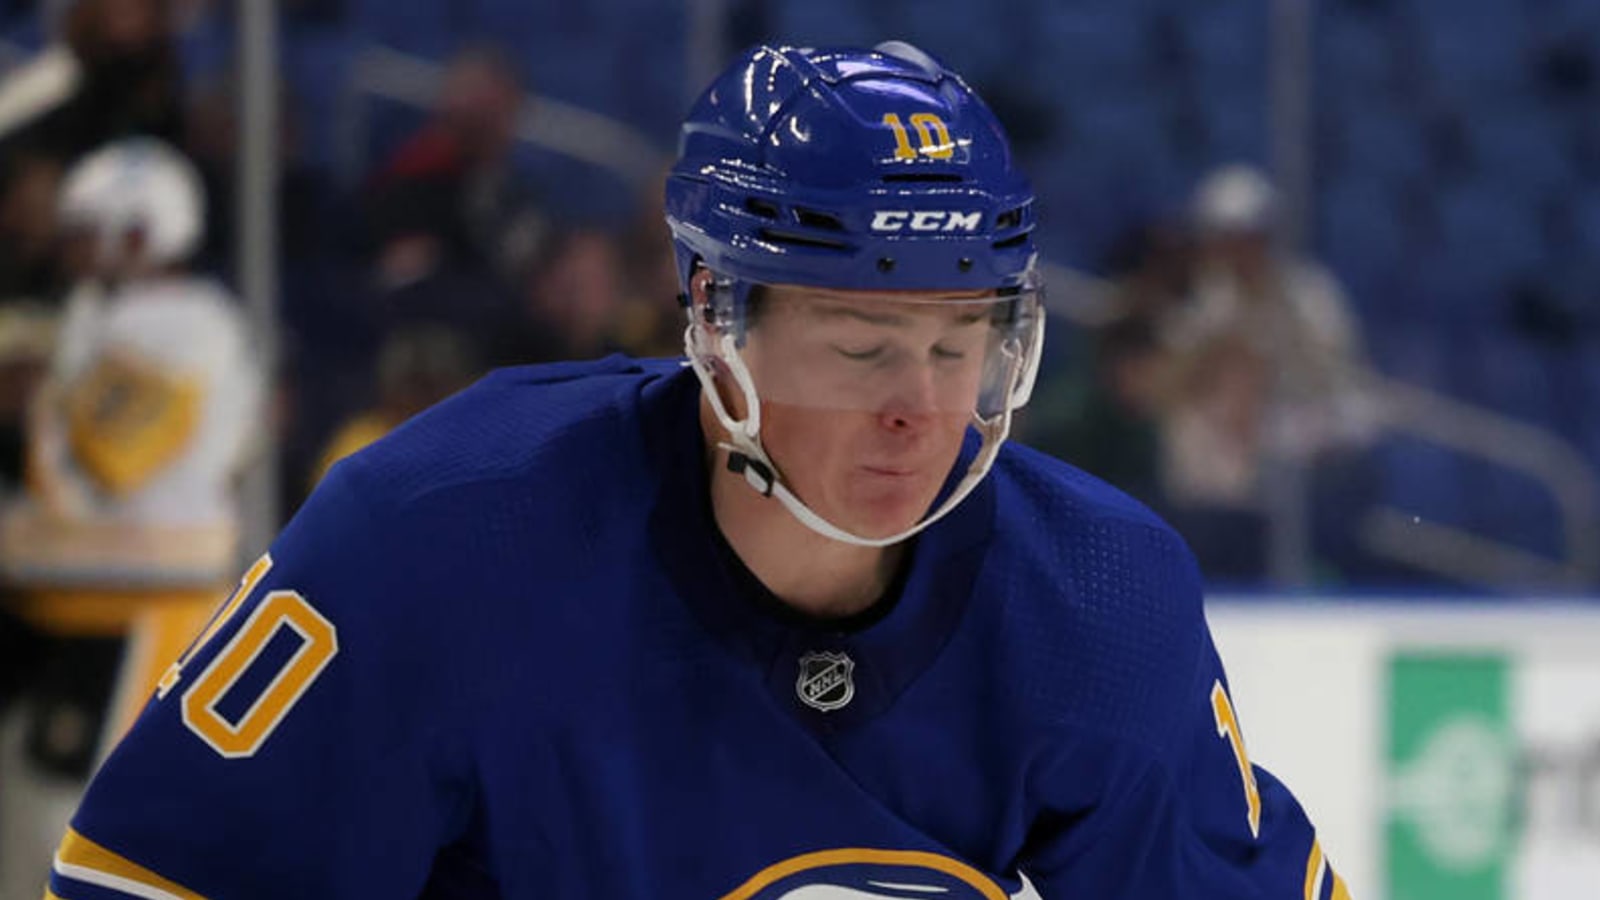 Sabres HC: Mittelstadt, Jokiharju out 'a couple of weeks'